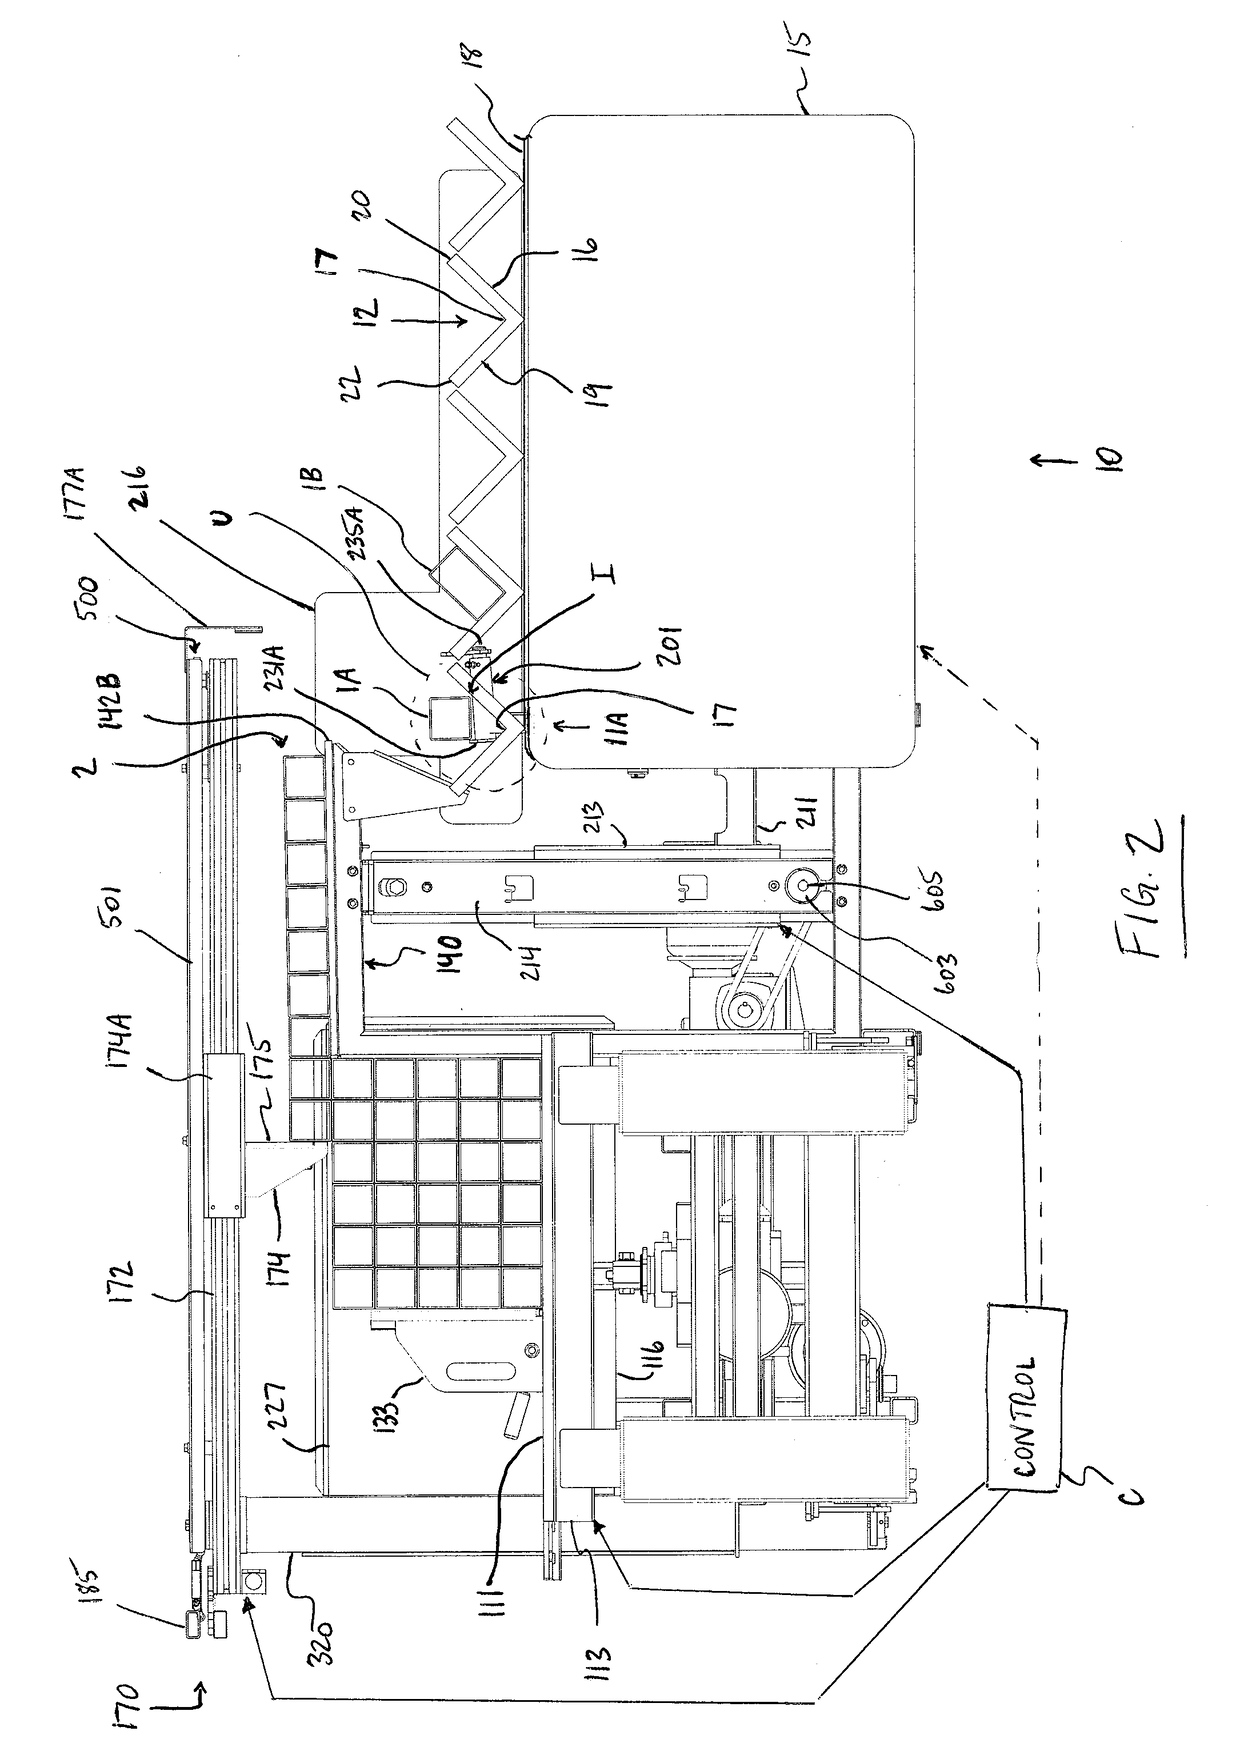 System for Loading Elongated Members Such as Tubes Onto a Conveyor for Later Processing